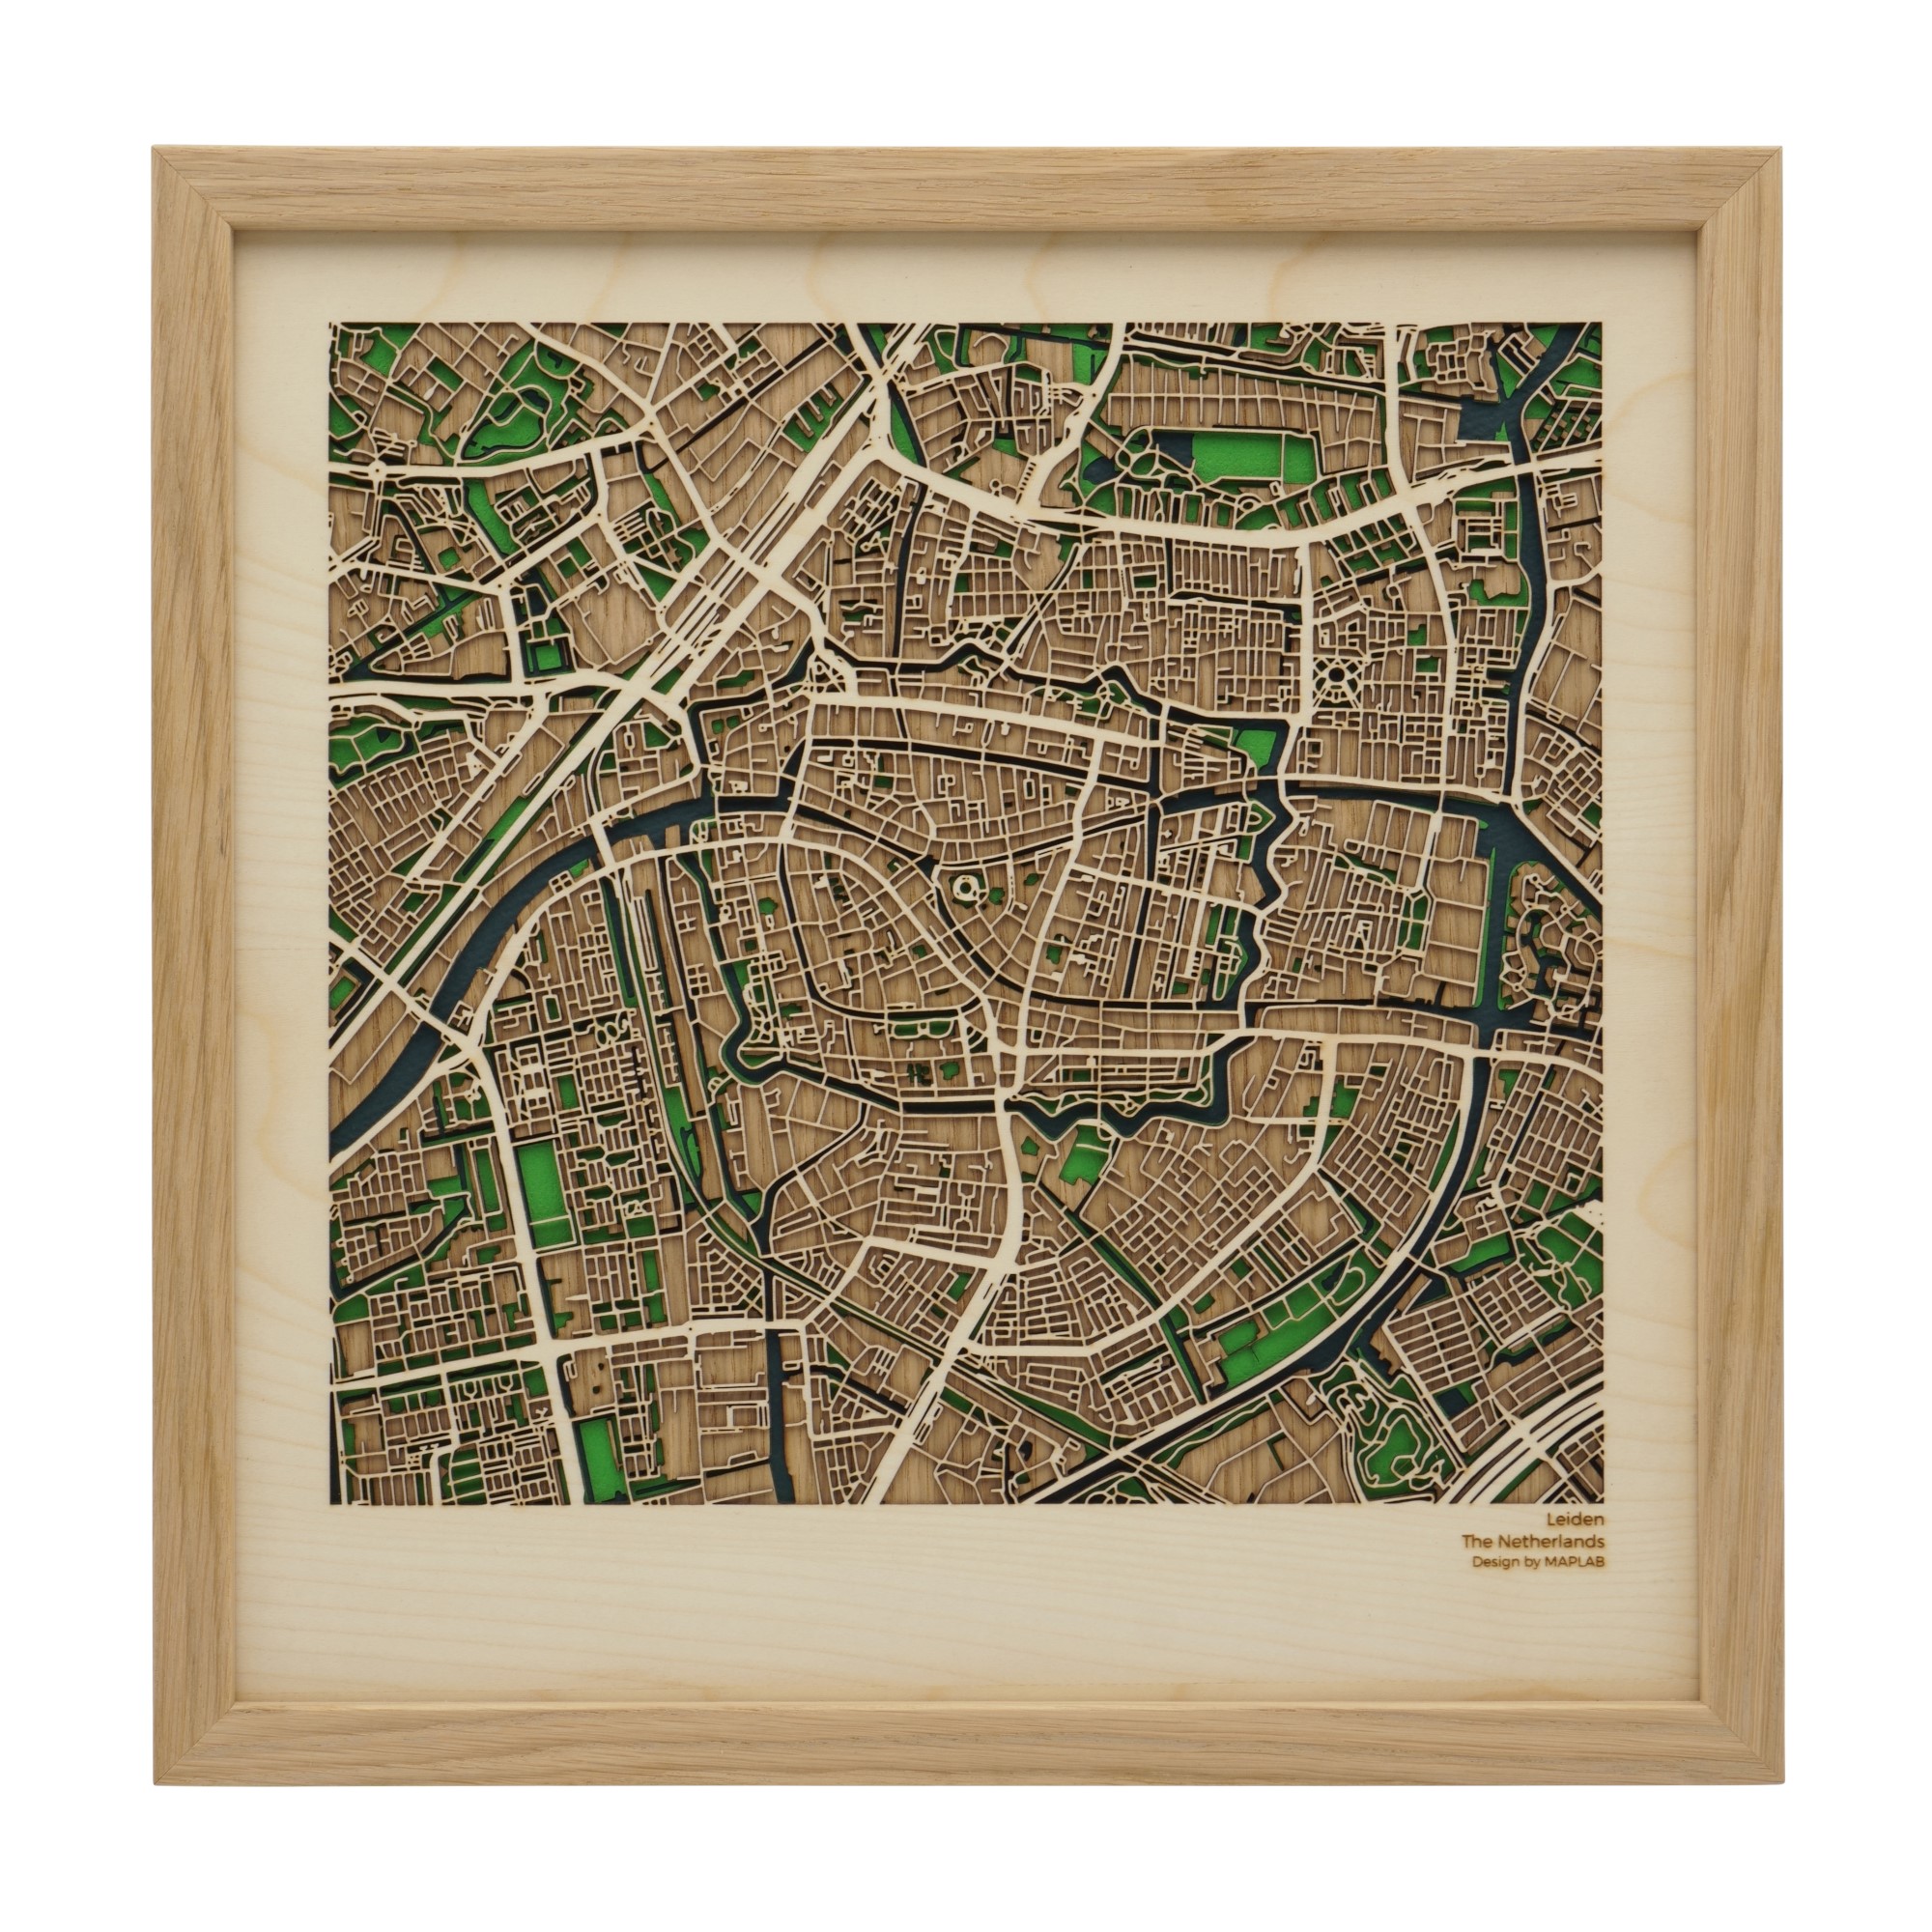 Hardwood map of Leiden. XL Series Maplab. Size: 340*340mm made of Sycamore and Oak.